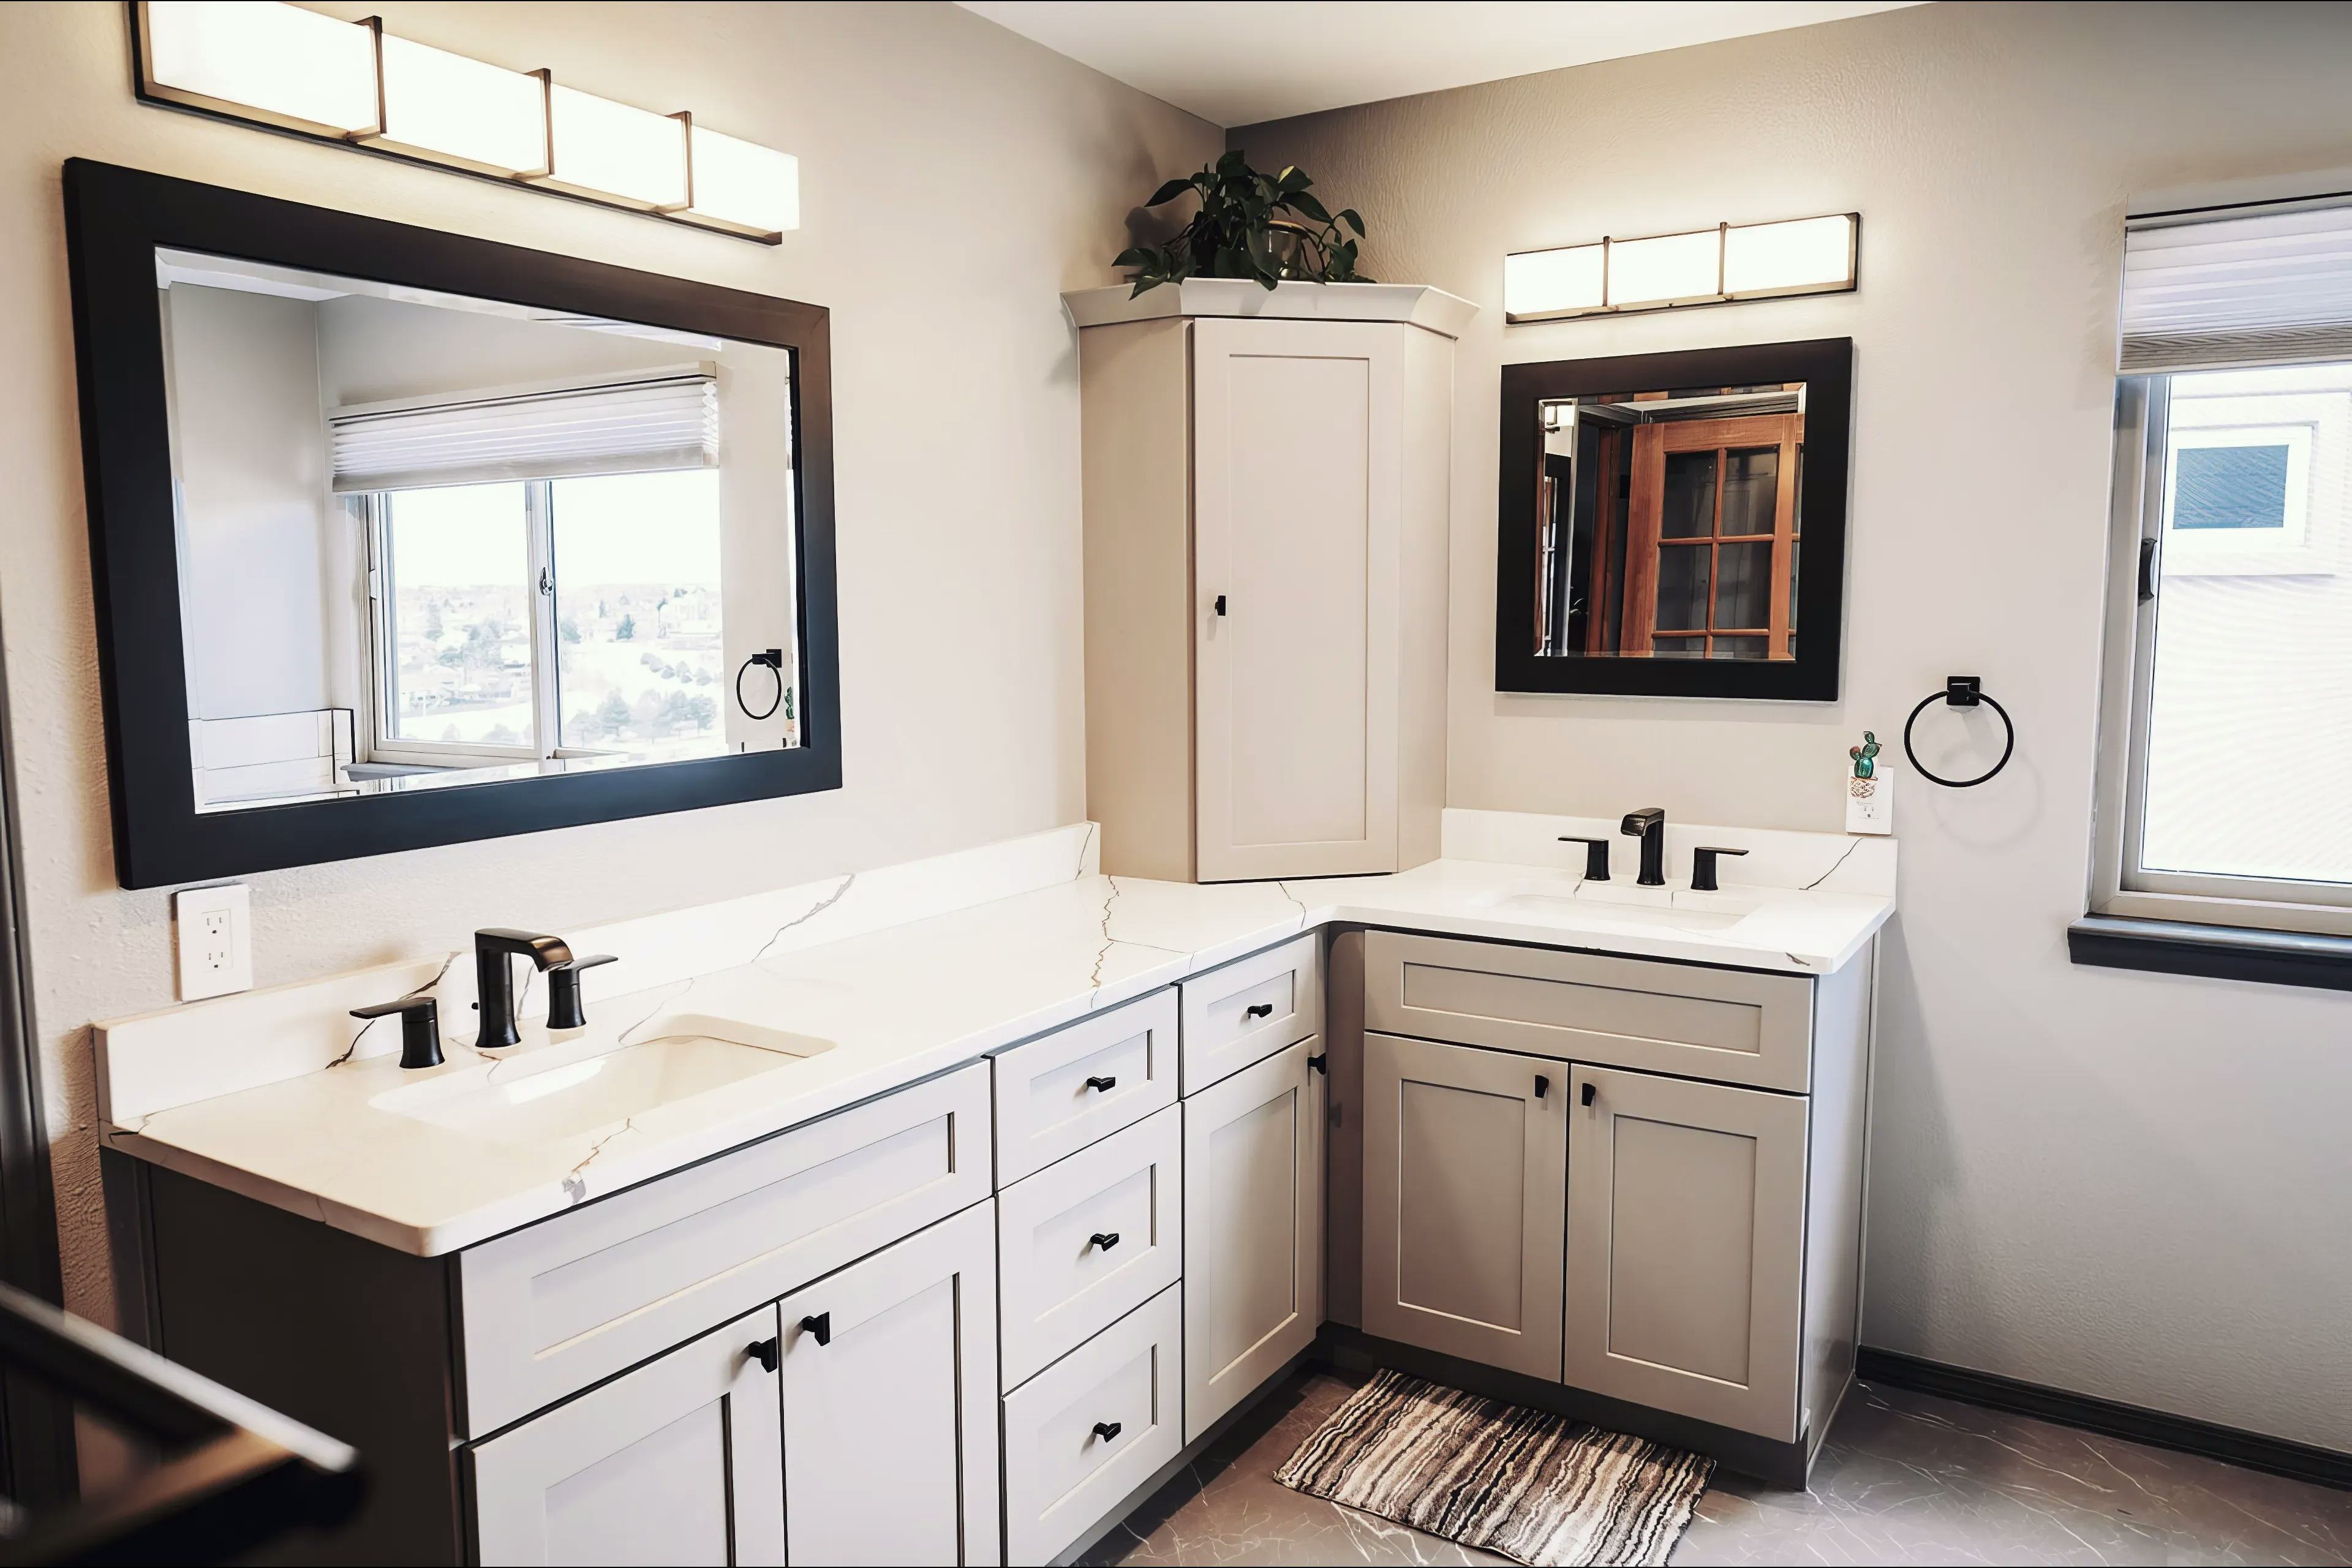 A bathroom walk-in shower remodel in Colorado Springs with a white stone counter top and a built in medicine cabinet